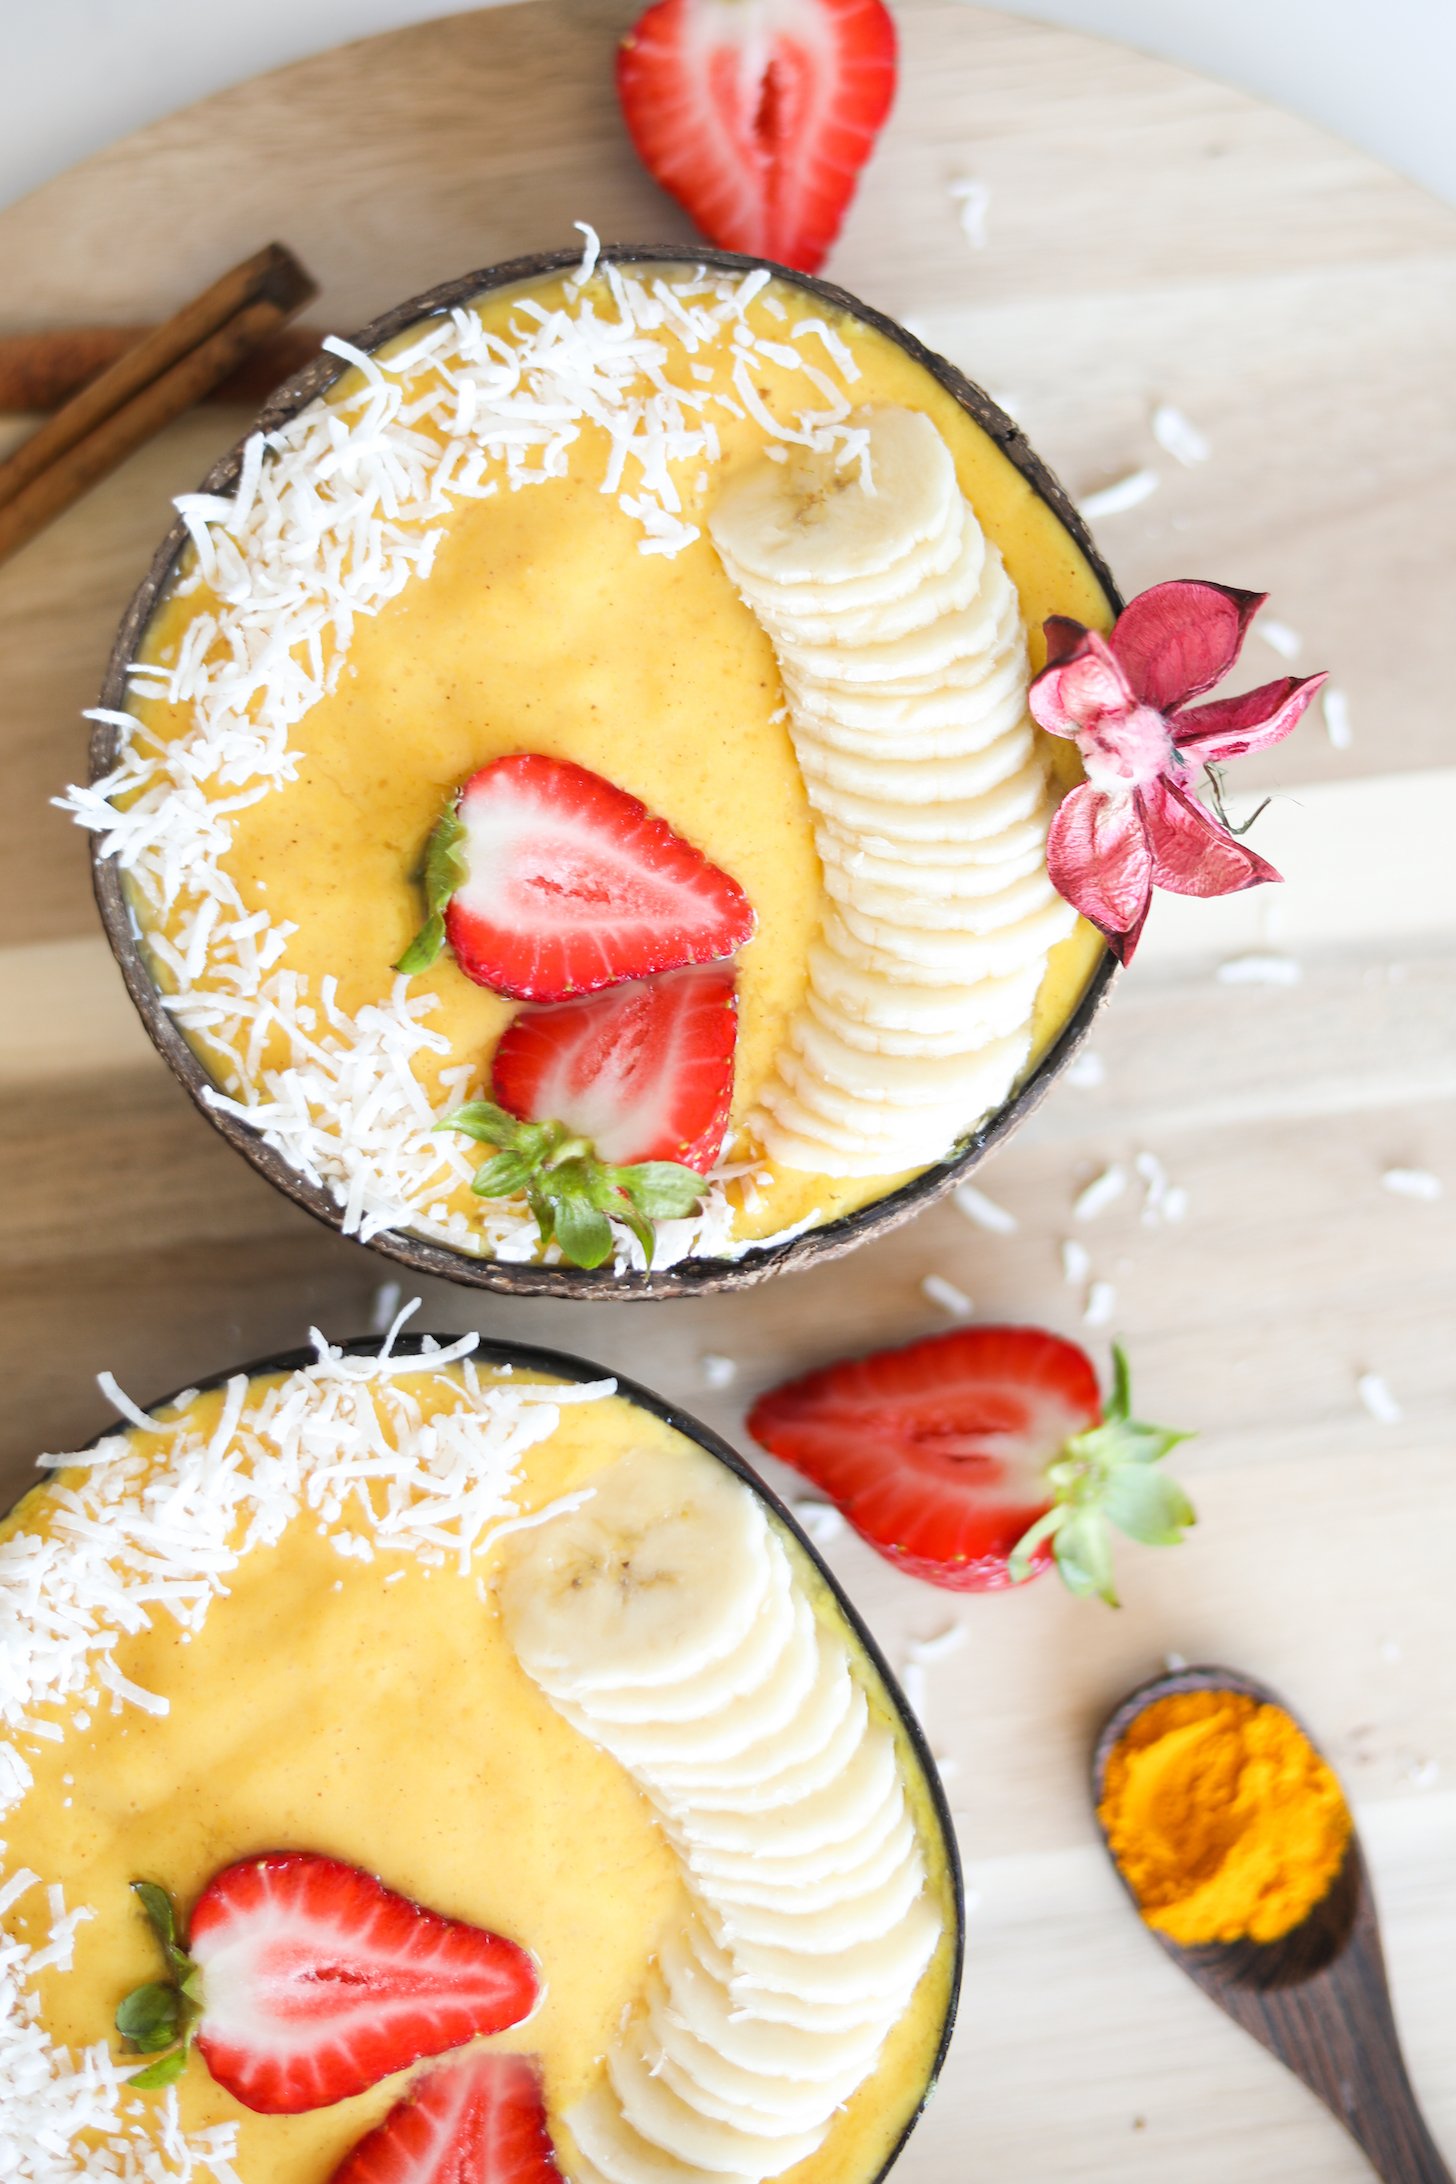 Flatlay image of two bowls of yellow smoothie topped with banana and strawberries.